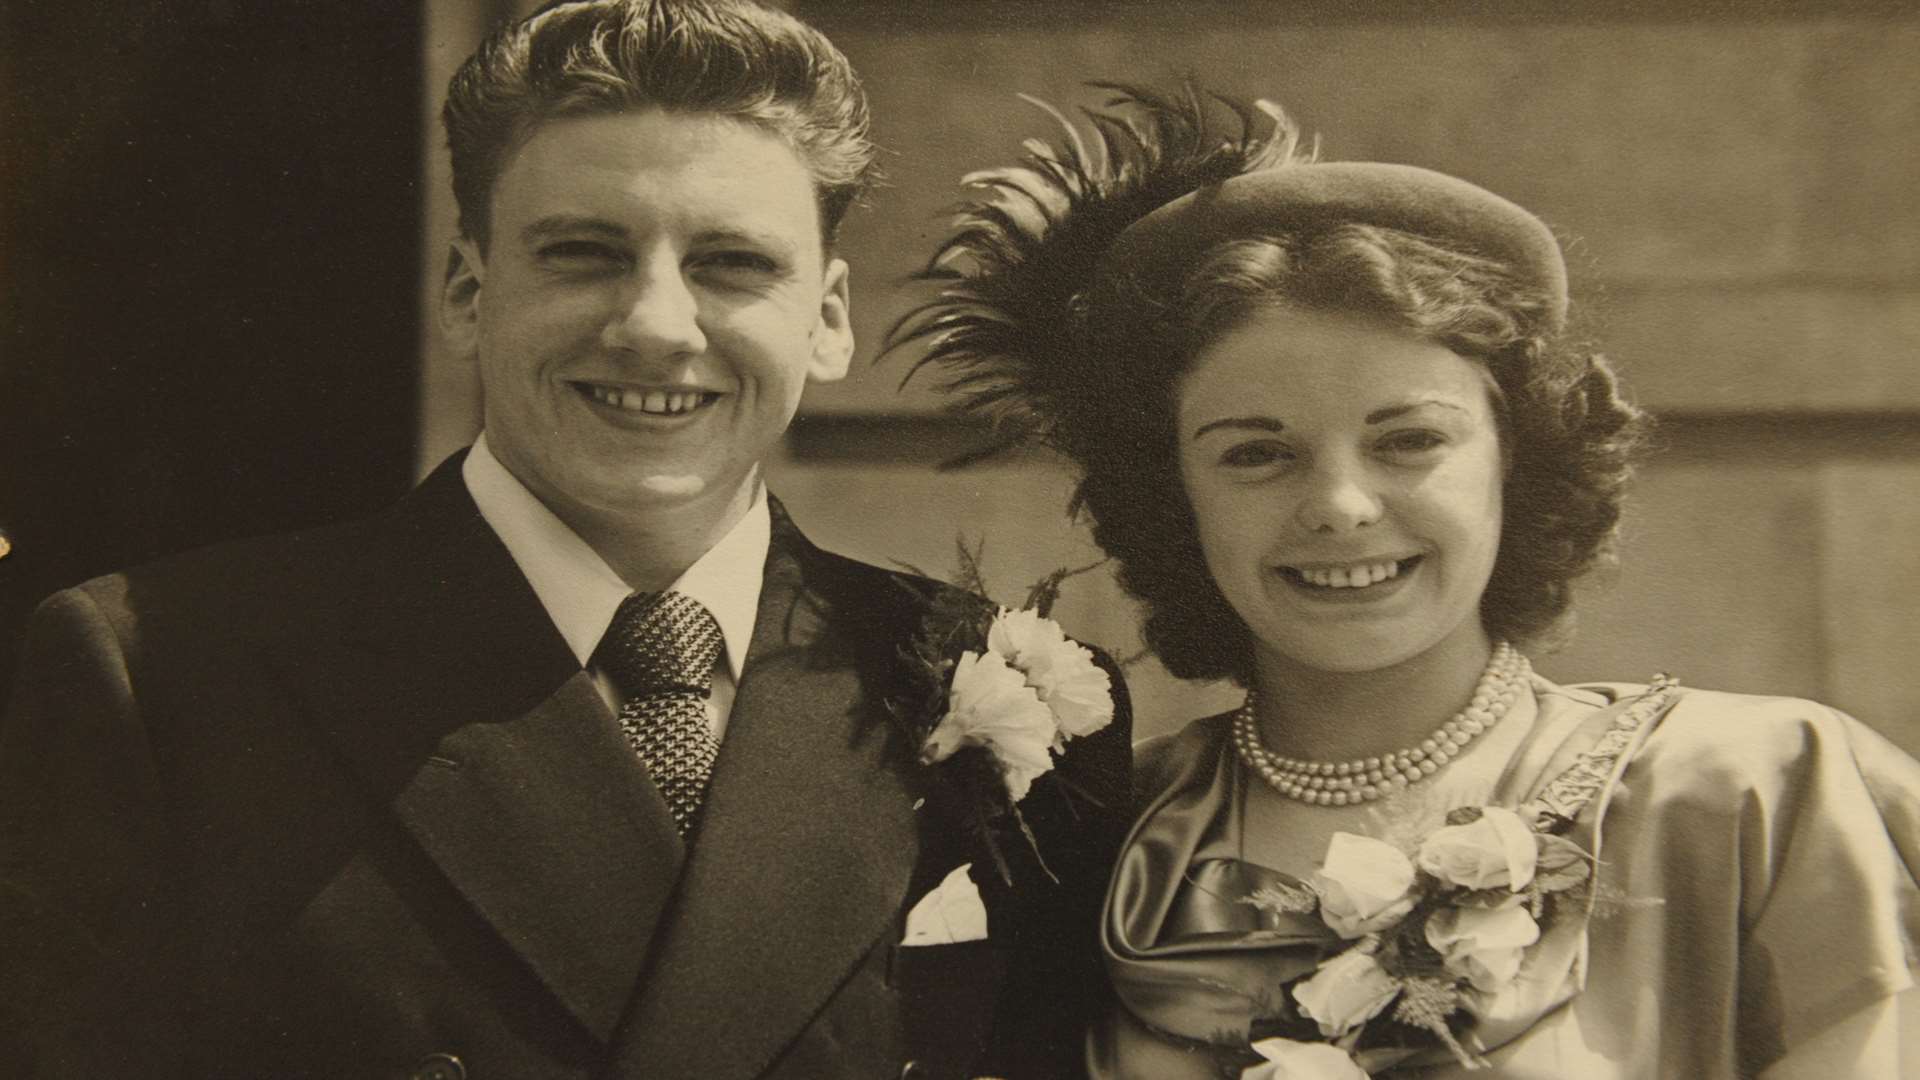 Fred and Joyce on their wedding day